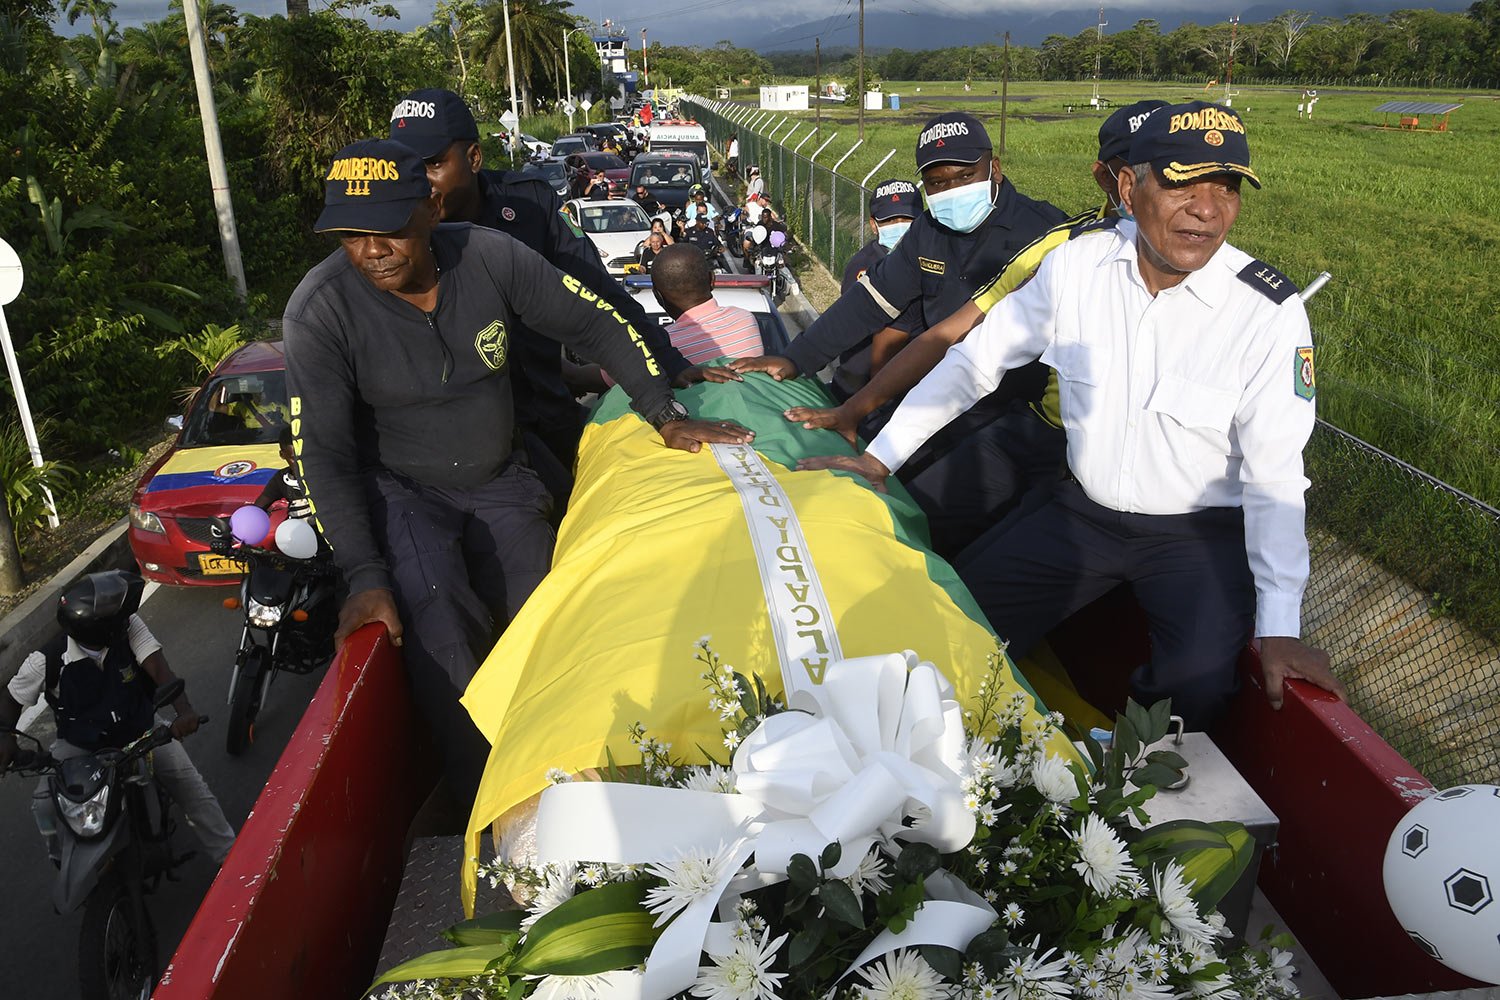  The remains of former Colombian soccer star Freddy Rincon is transported on a fire truck from the city’s airport to the sports coliseum after arriving to his native Buenaventura, Colombia, April 14, 2022. Rincon, a former captain of the Colombian na